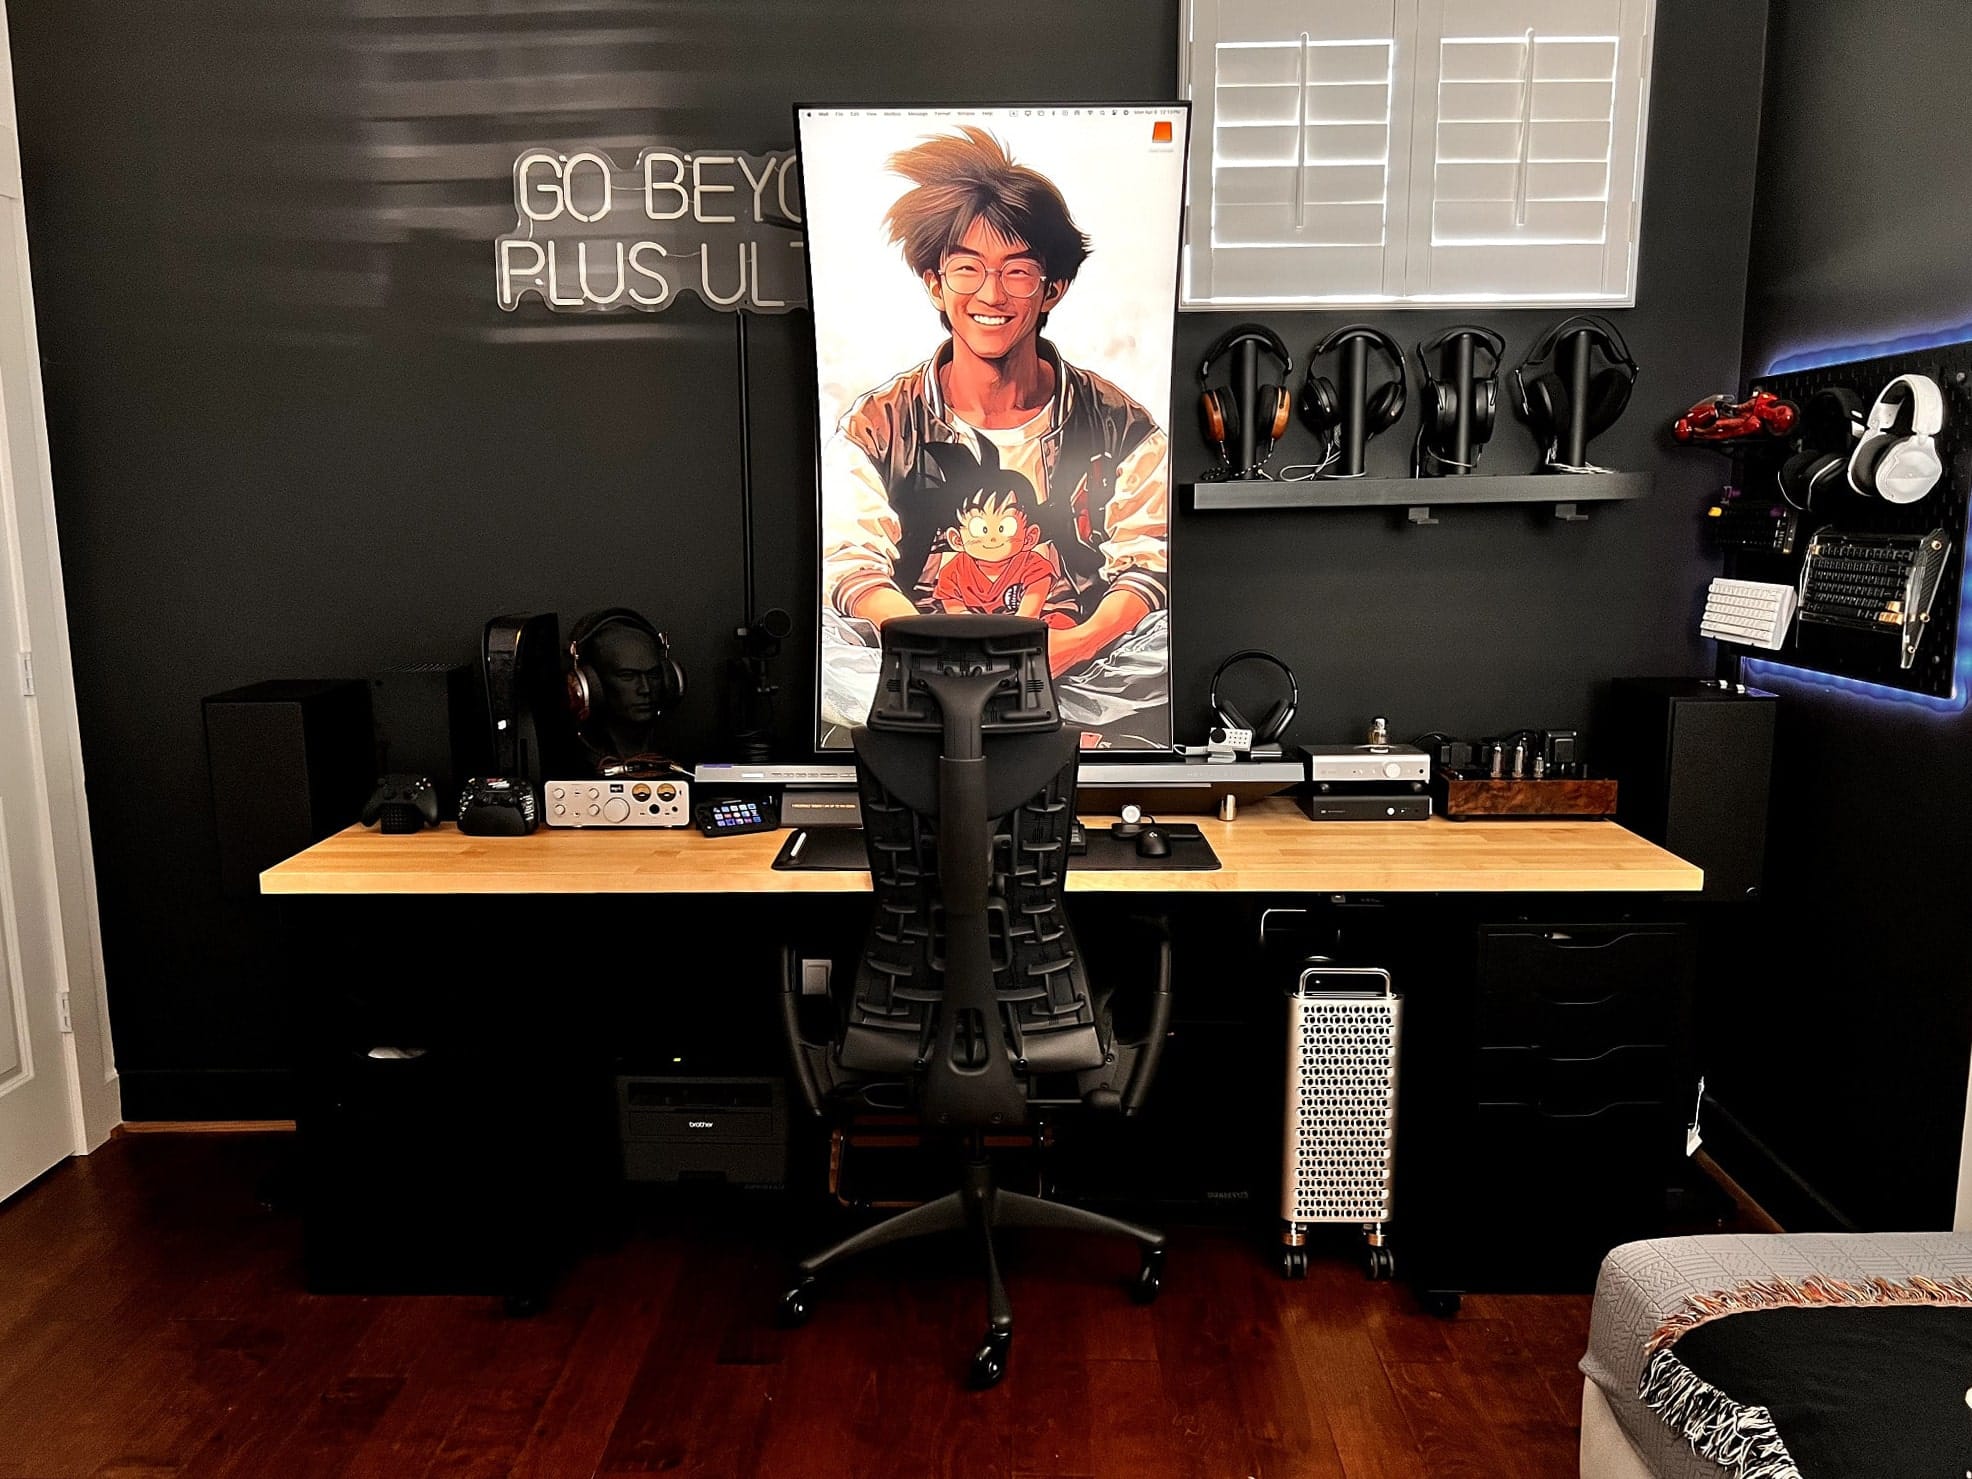 A modern gaming setup with a large curved Samsung monitor, an LED sign ”GO BEYOND PLUS ULTRA” sign, ergonomic chair, audio equipment, and wall-mounted headphones in a minimalist black and wood-themed room